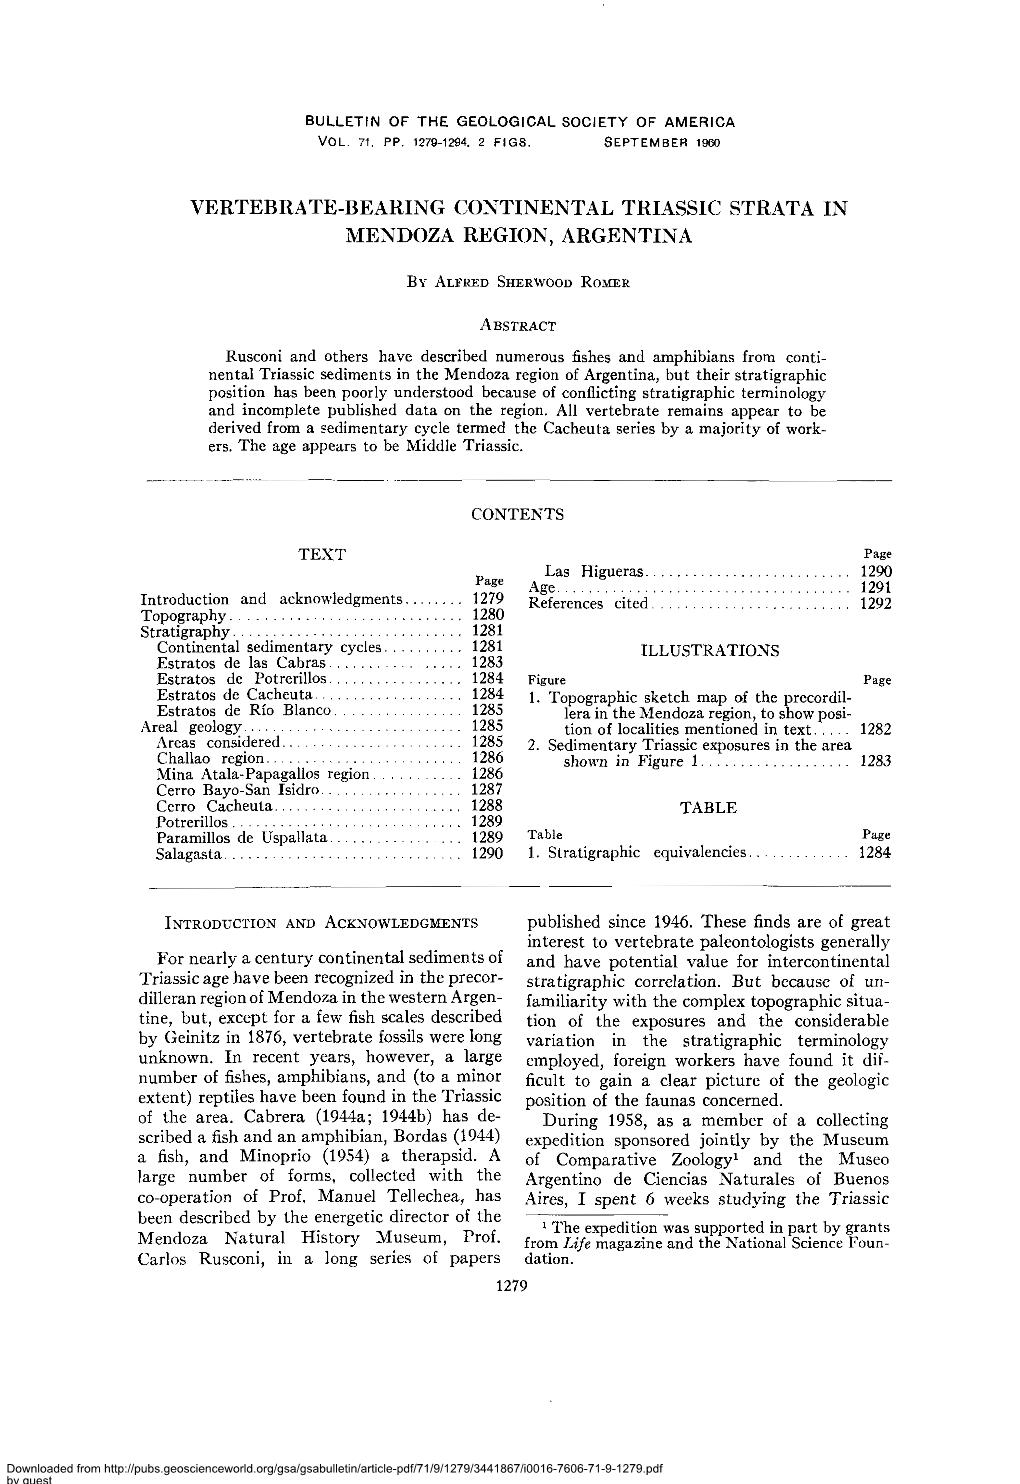 Bulletin of the Geological Society of America Vol. 71